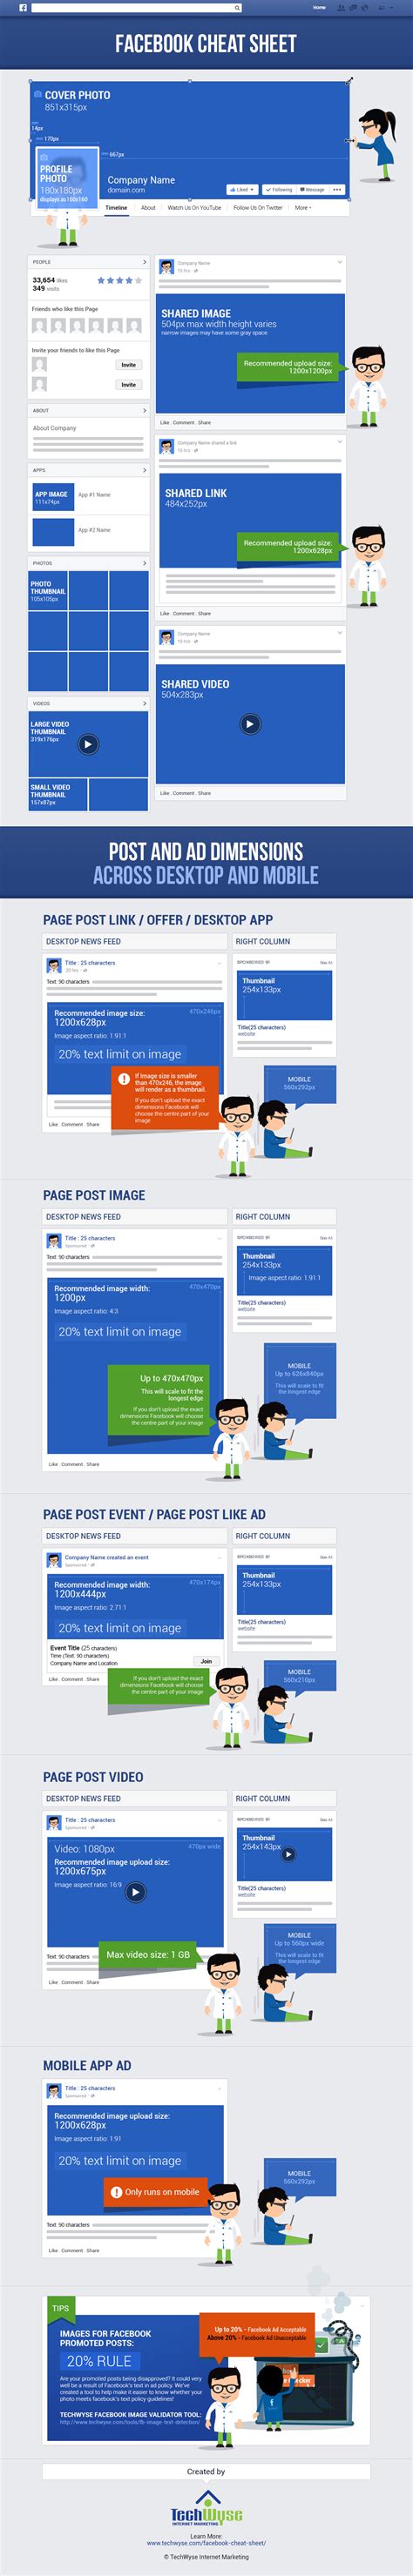 Facebook Cheat Sheet Image Size And Dimensions ~ The 3rd World View